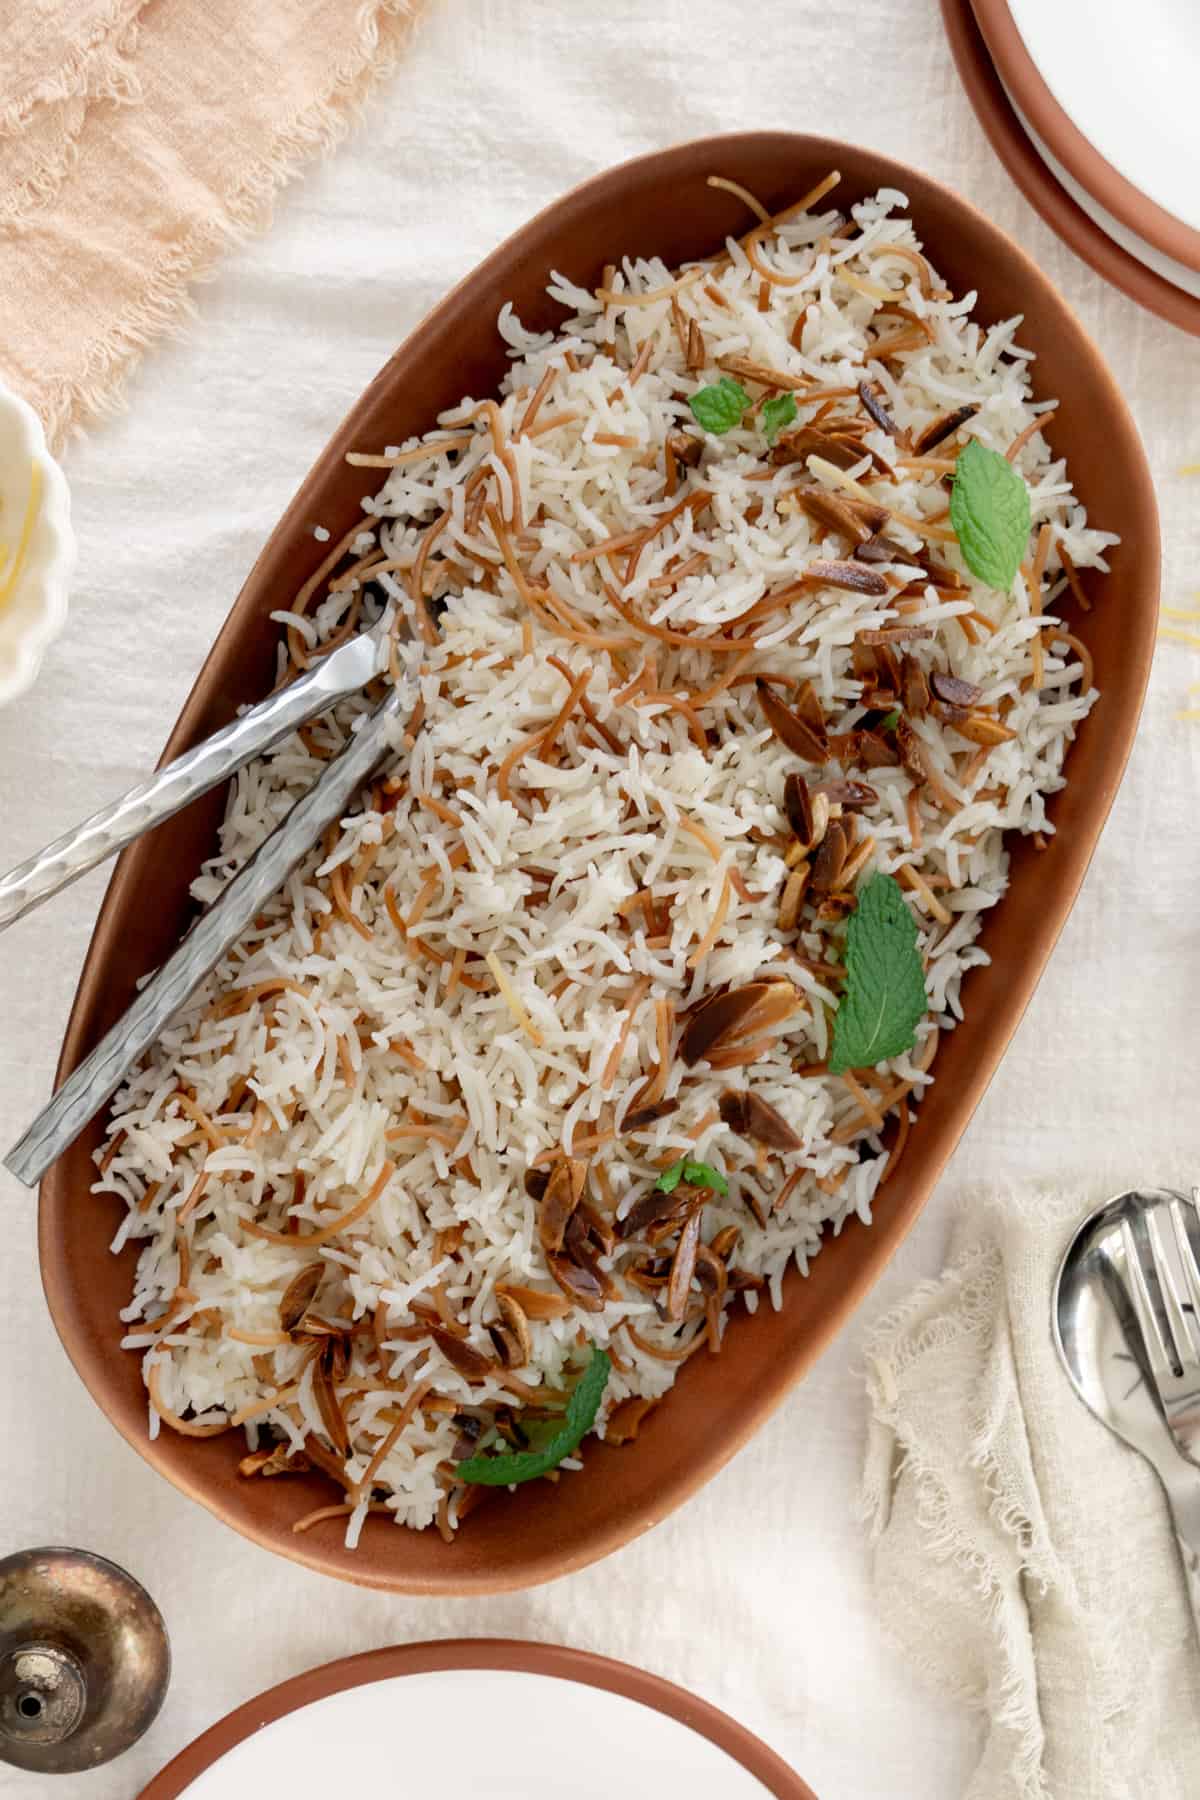 lebanese vermicelli rice in a brown bowl with silver cutlery